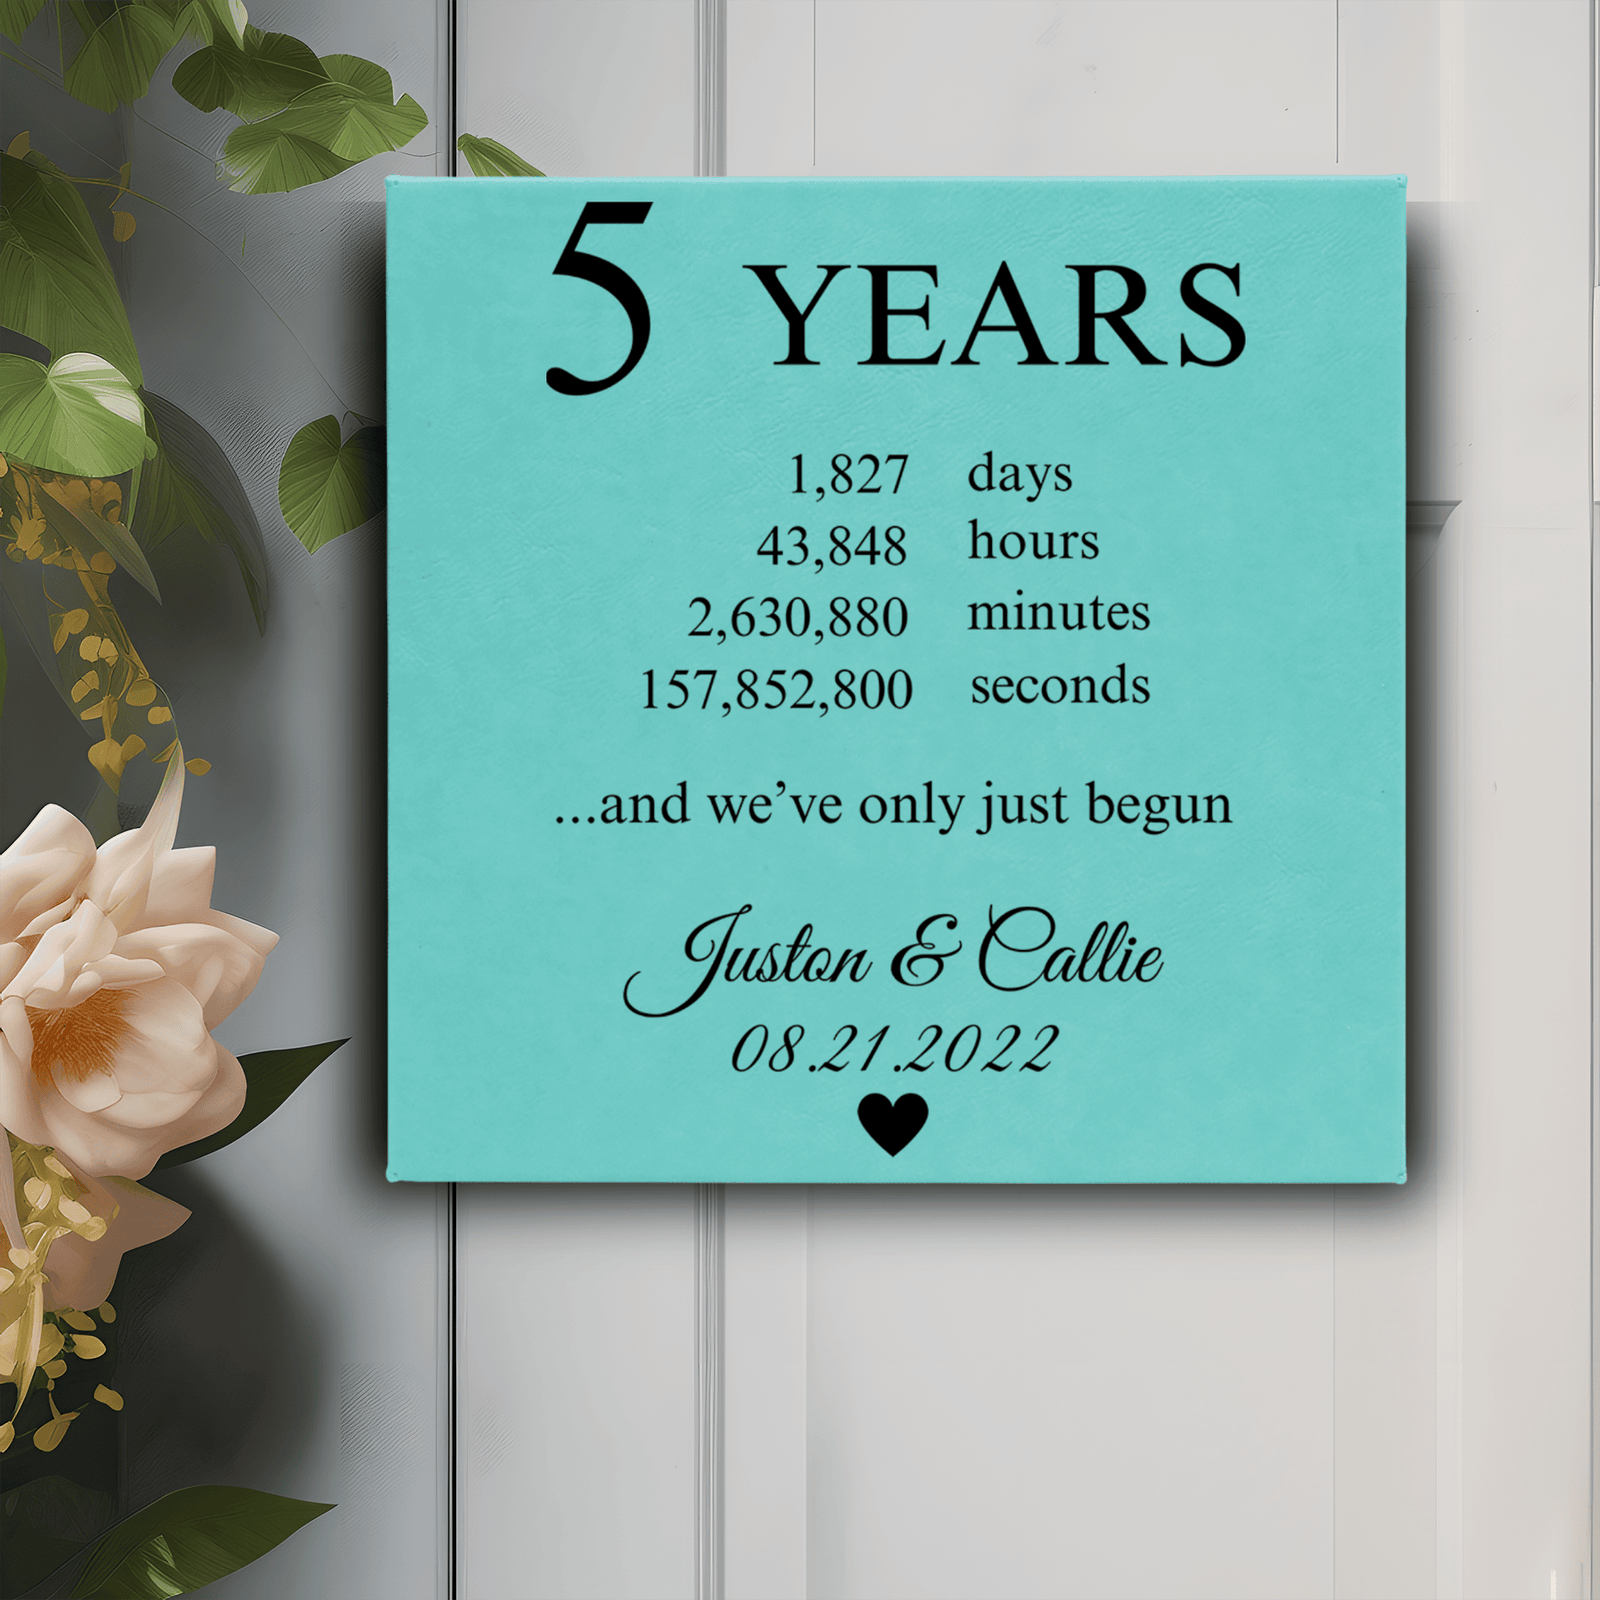 Teal Leather Wall Decor With 5 Year Anniversary Design